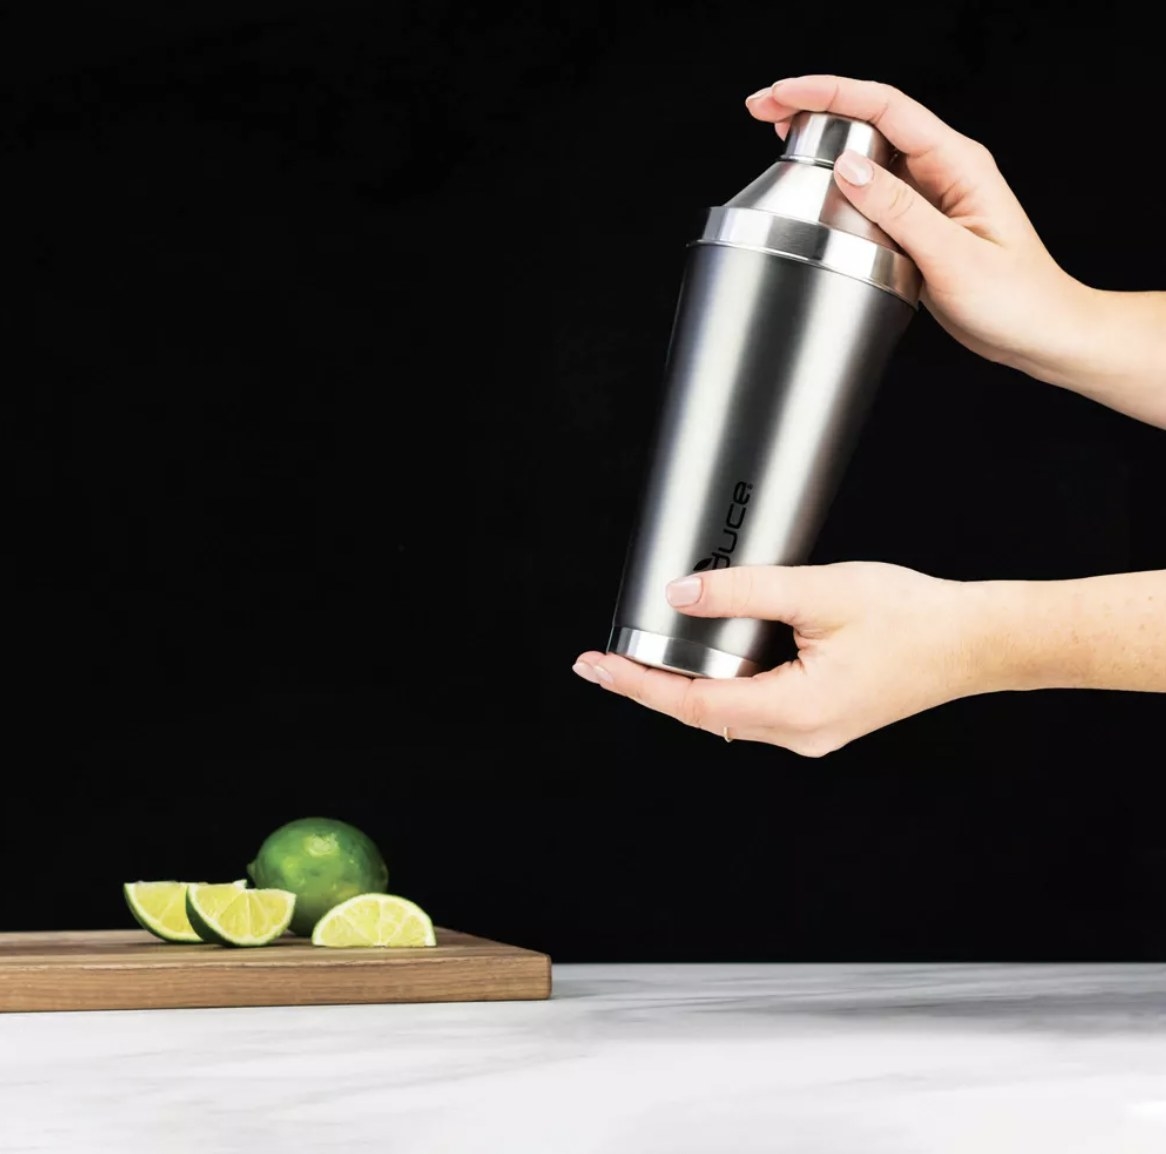 Two hands holding a silver cocktail shaker next to a board with limes on it